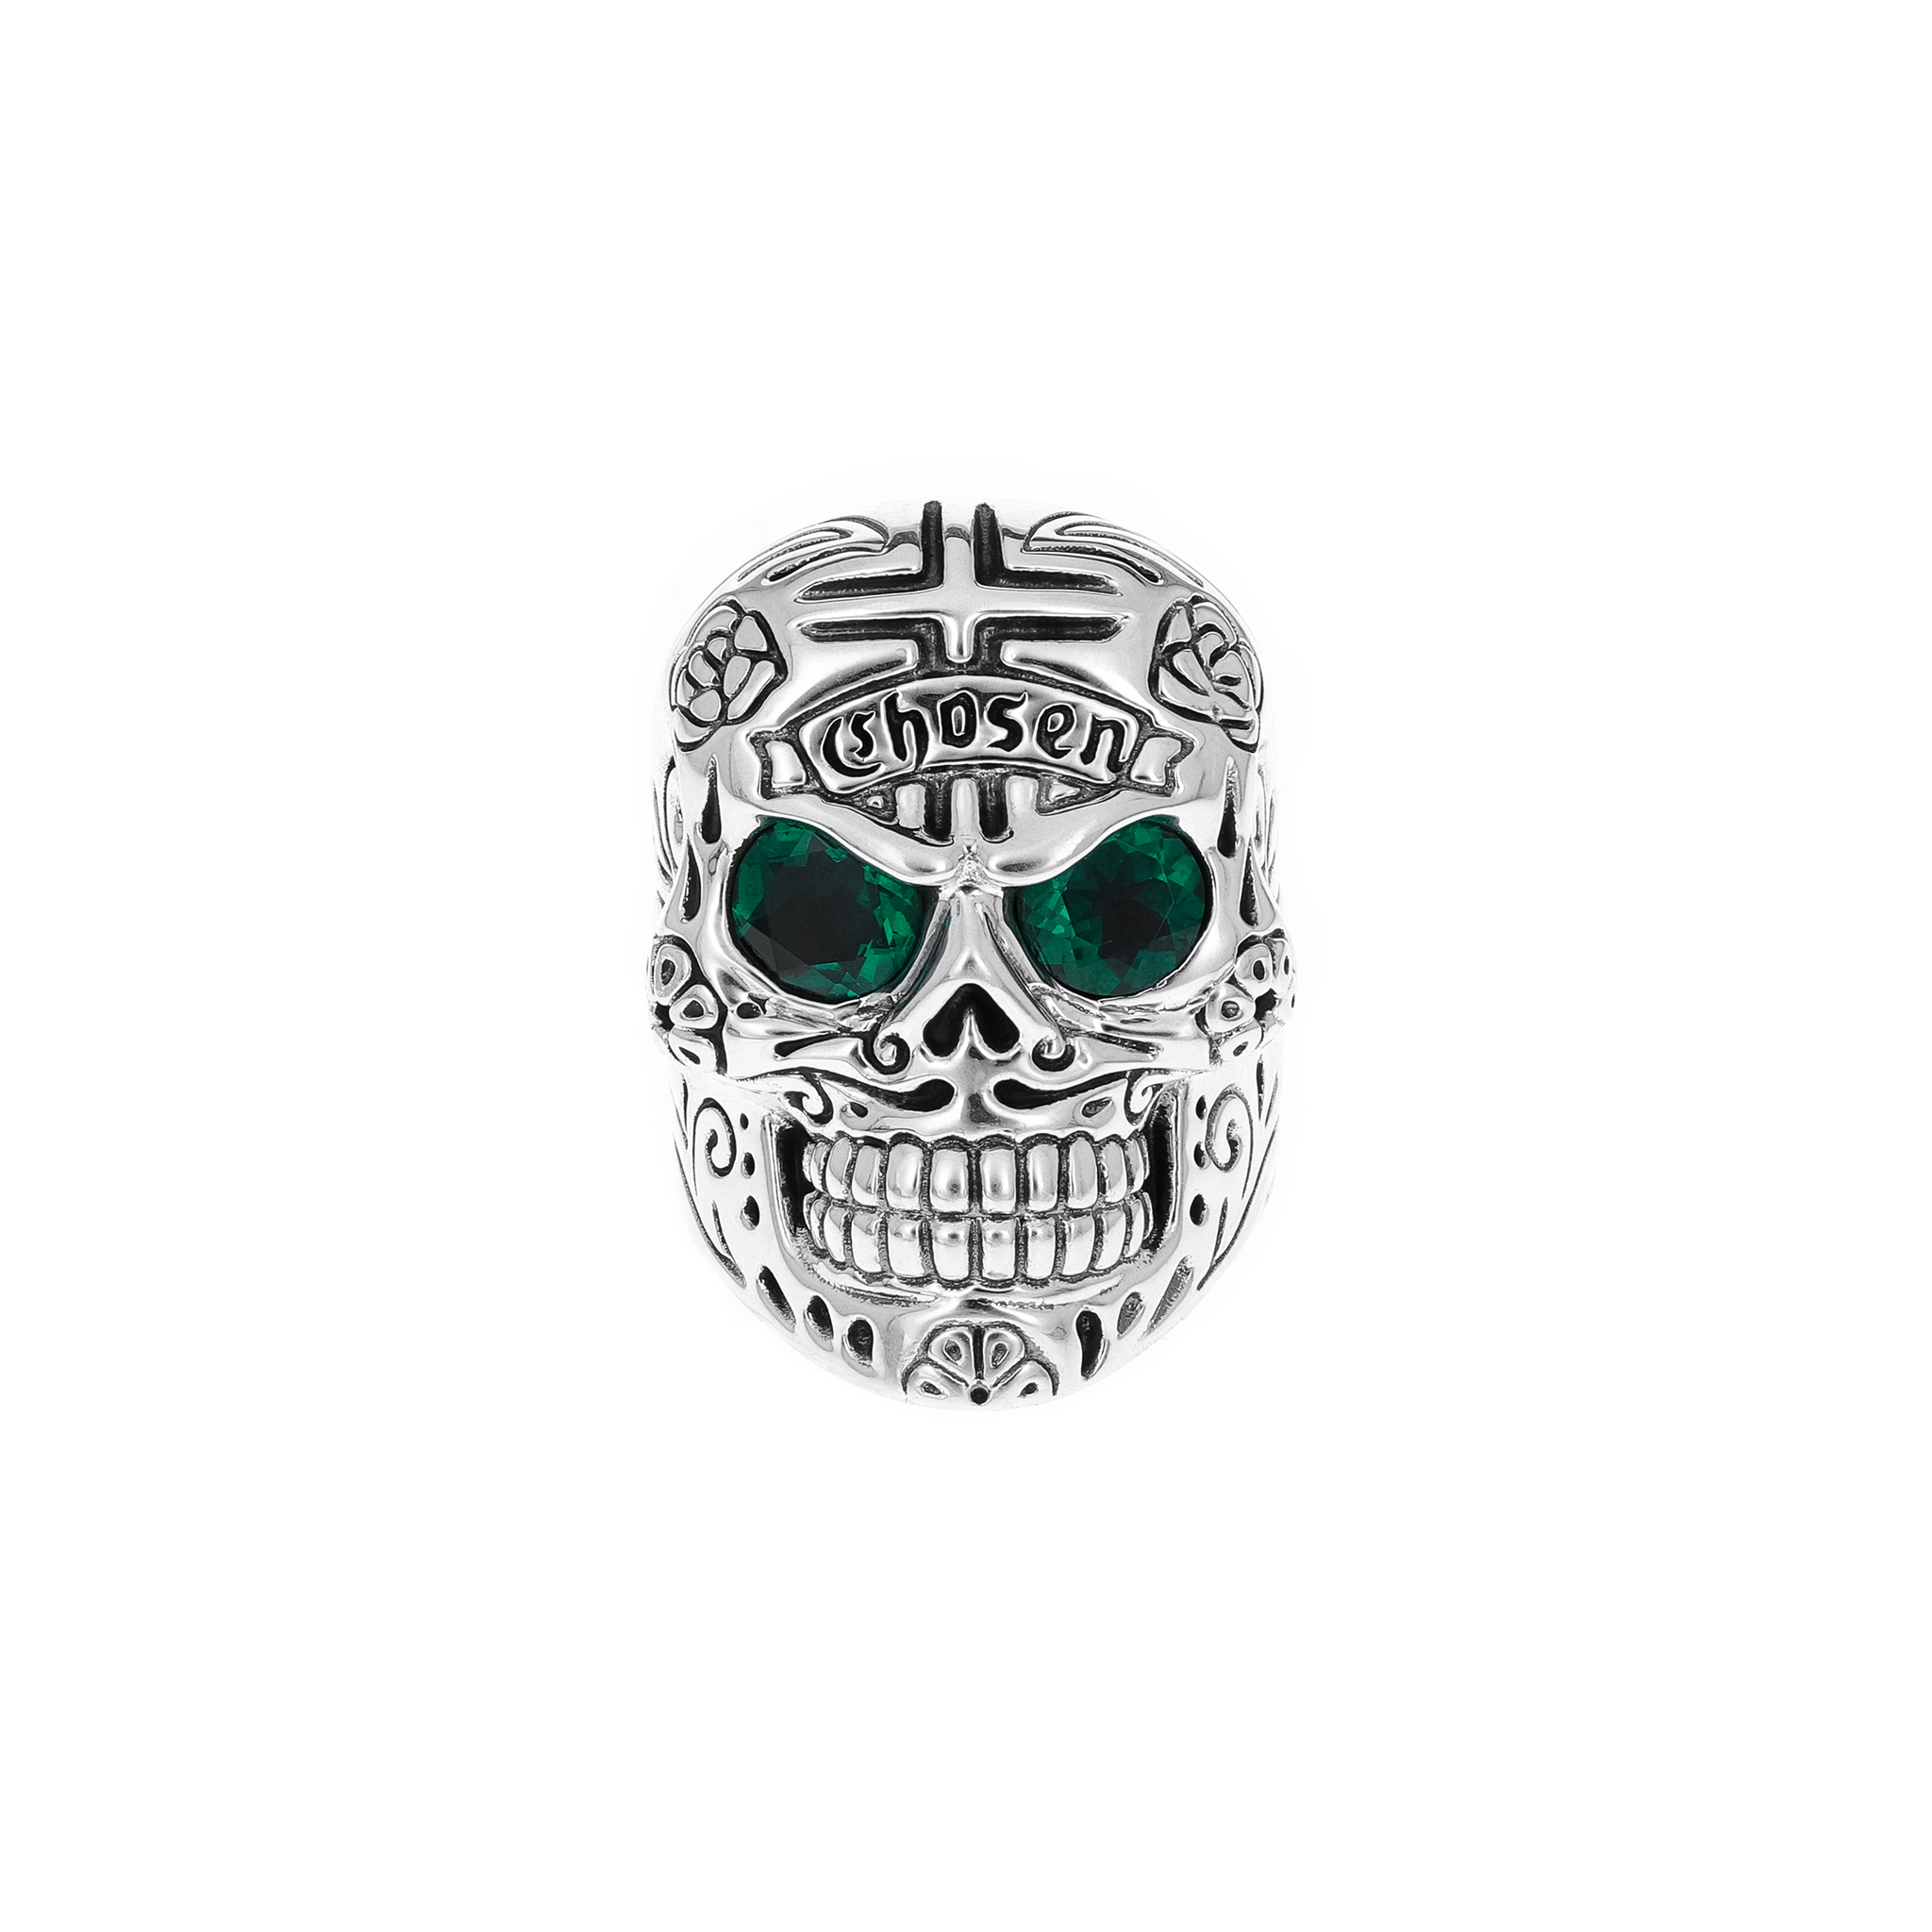 Large Skull Ring with Chosen Cross Detail and Green Emerald Eyes on white background